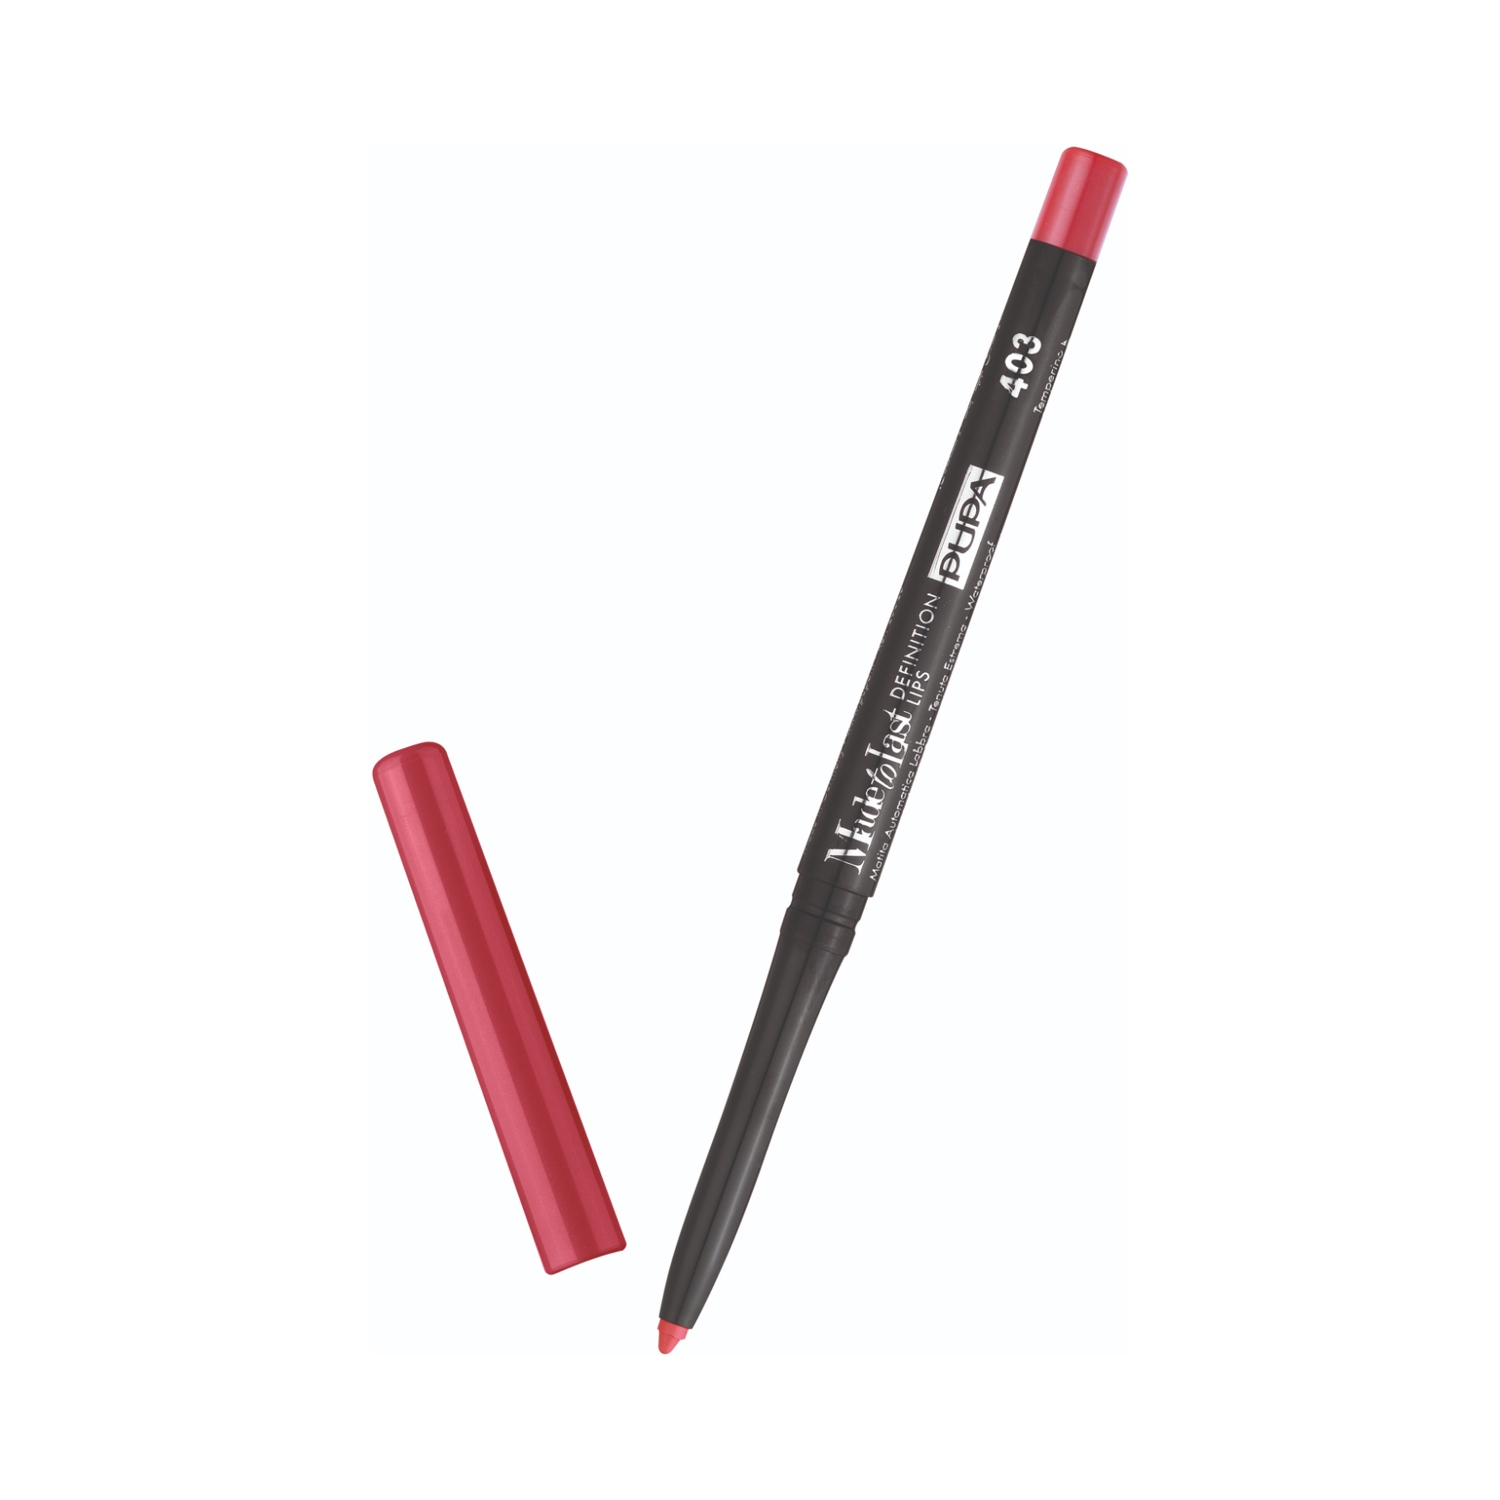 Pupa Milano | Pupa Milano Made To Last Definition Lip Pencil - 403 Fruit Cocktail (0.35g)